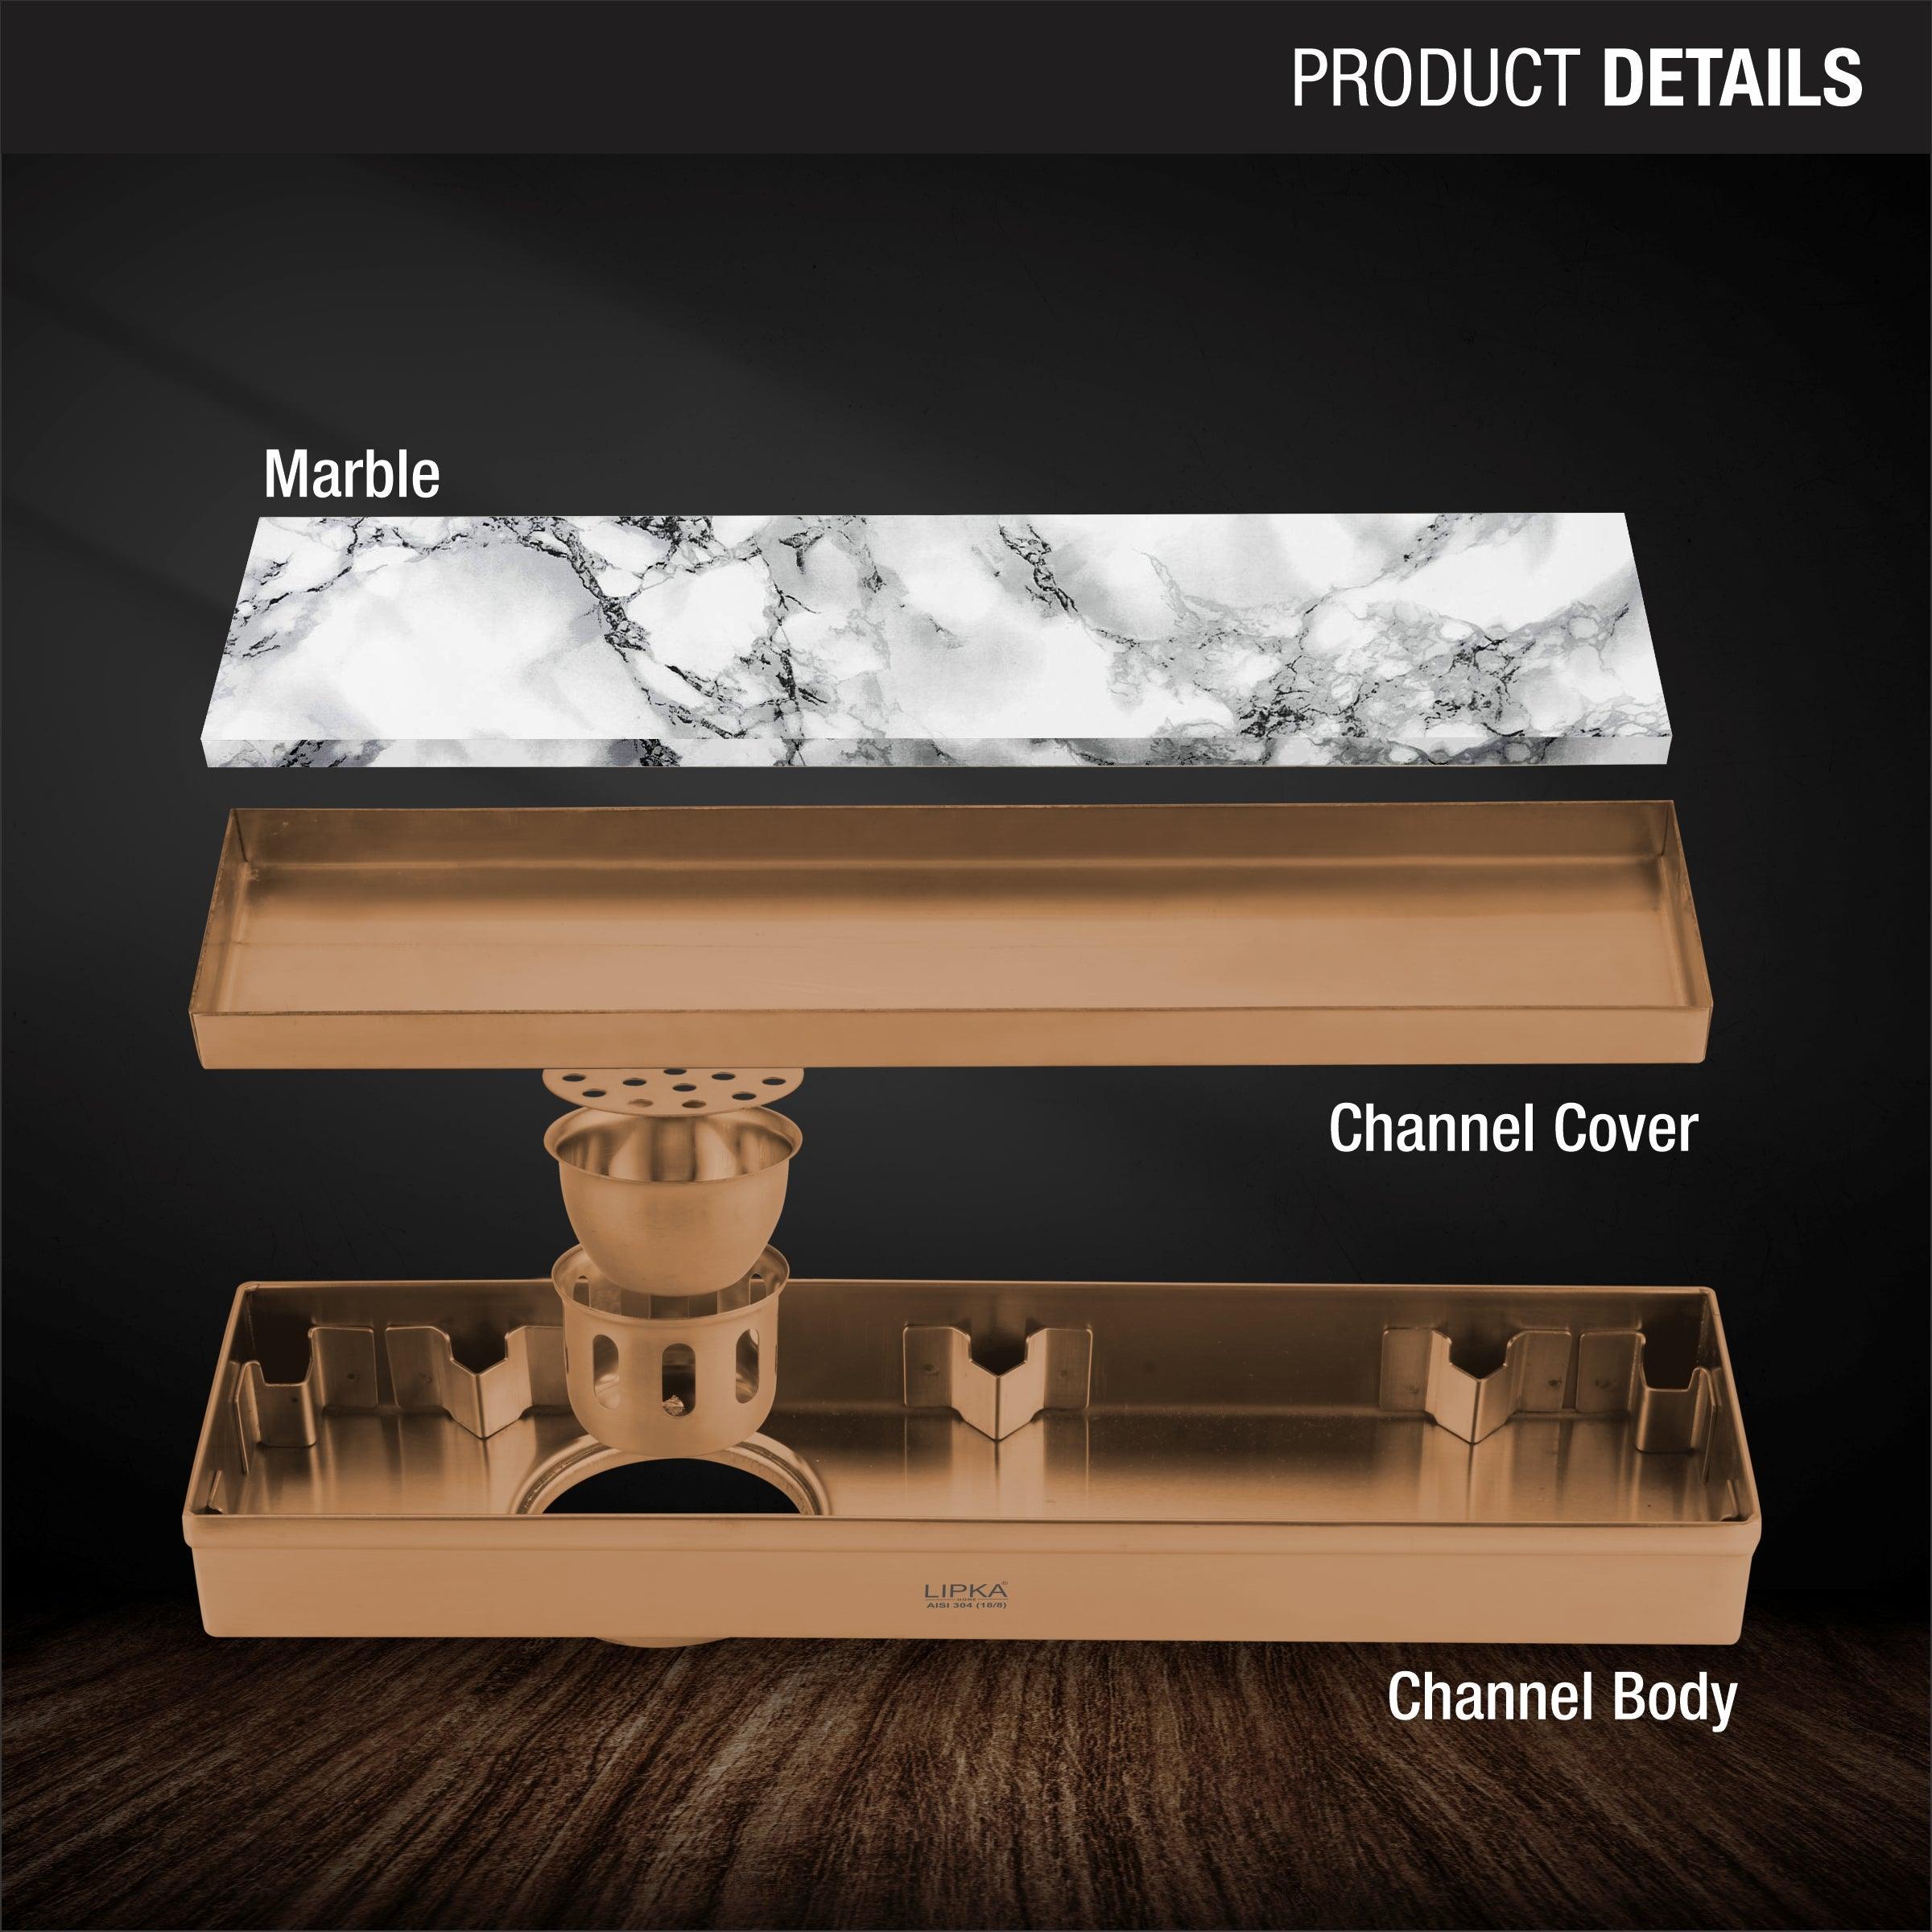 Marble Insert Shower Drain Channel - Antique Copper (18 x 3 Inches) product details